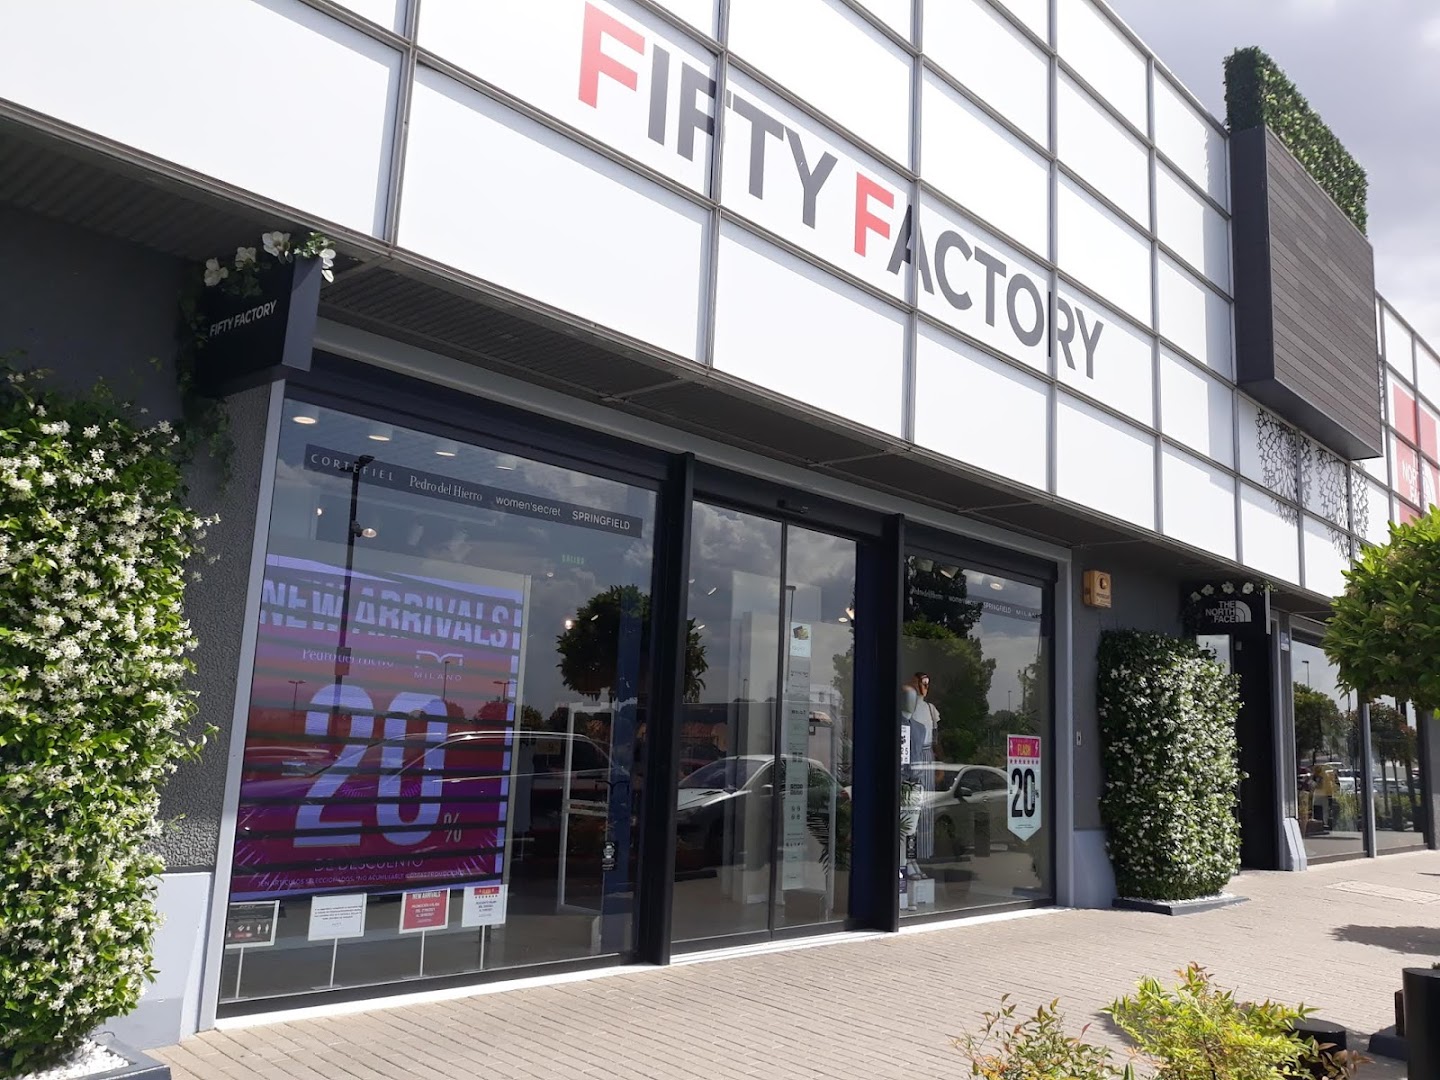 FIFTY FACTORY.